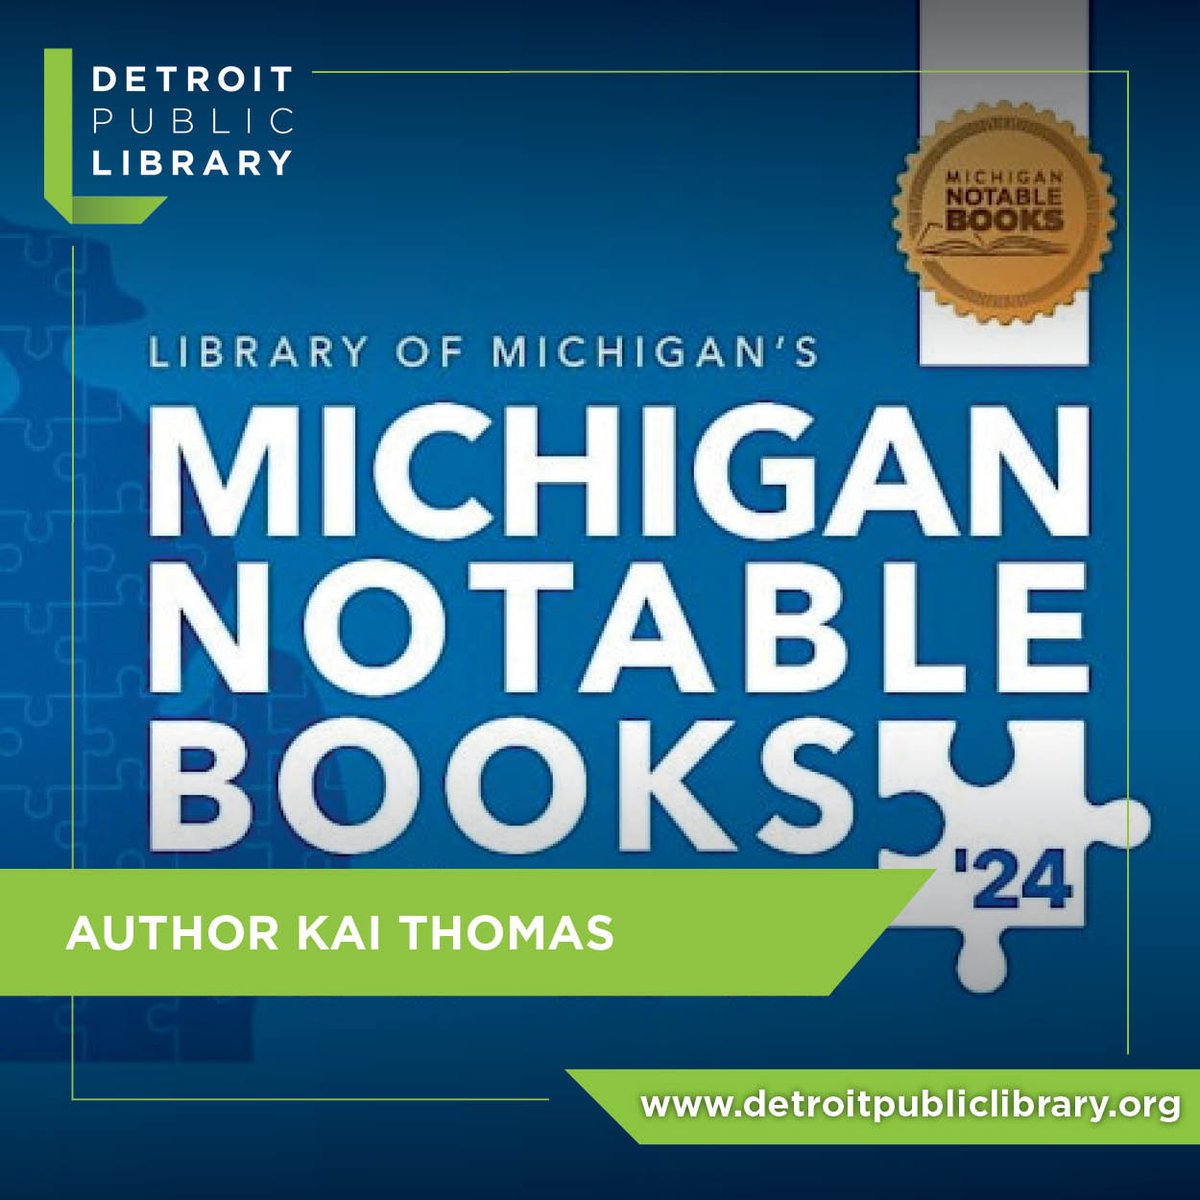 Join Michigan Notable Books author Kai Thomas as he talks about his debut novel, 'In the Upper Country' at the #detroitpubliclibrary on Thursday, April 25 at 2 pm. RSVP: eventbrite.com/e/2024-michiga…